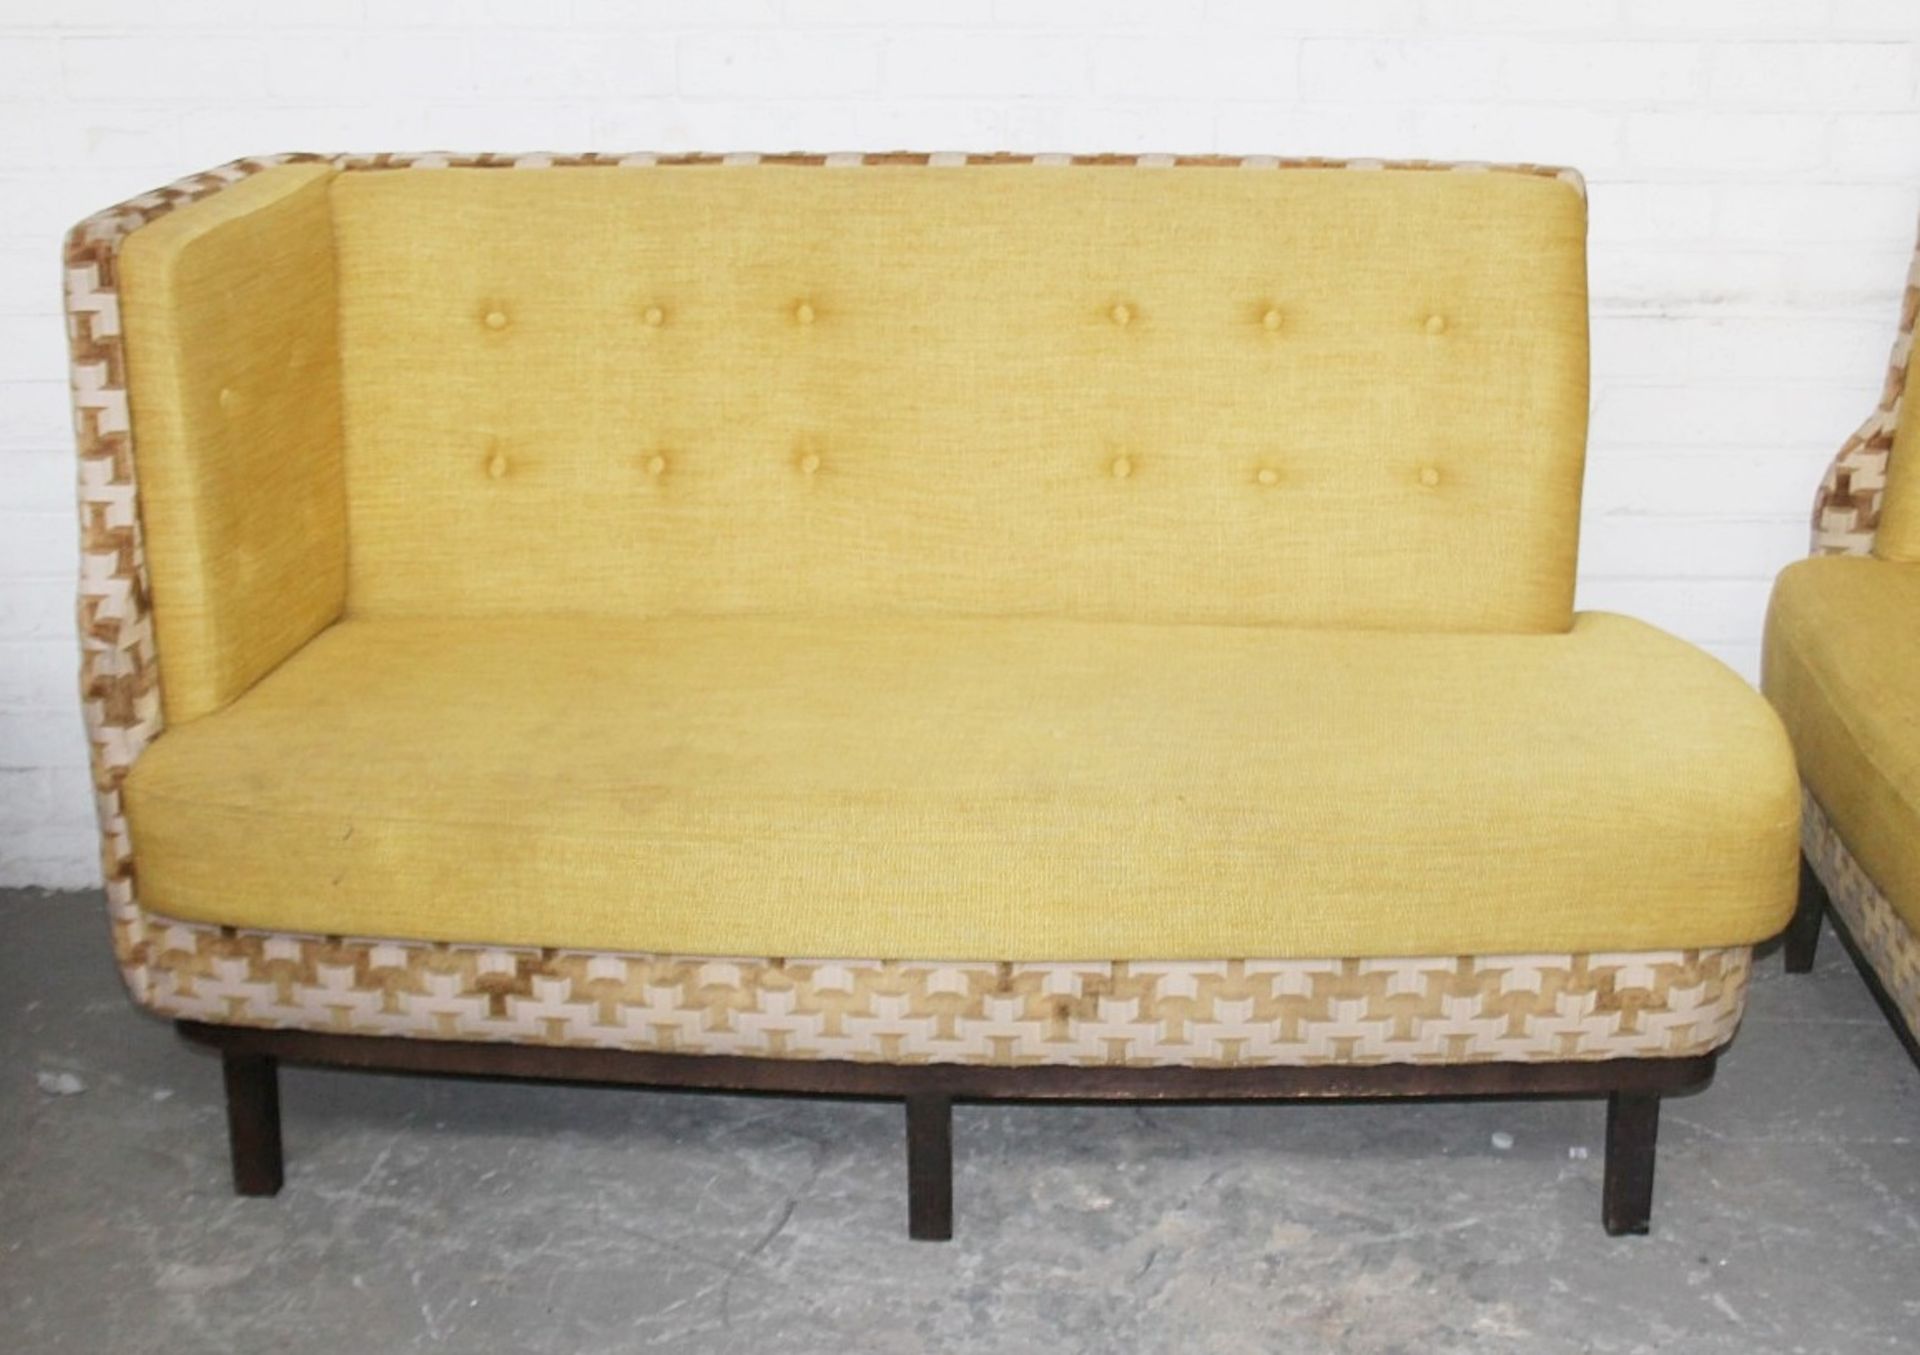 1 x Commercial Freestanding Left-Hand 2-Seater Bench, Upholstered In Premium Gold-Coloured